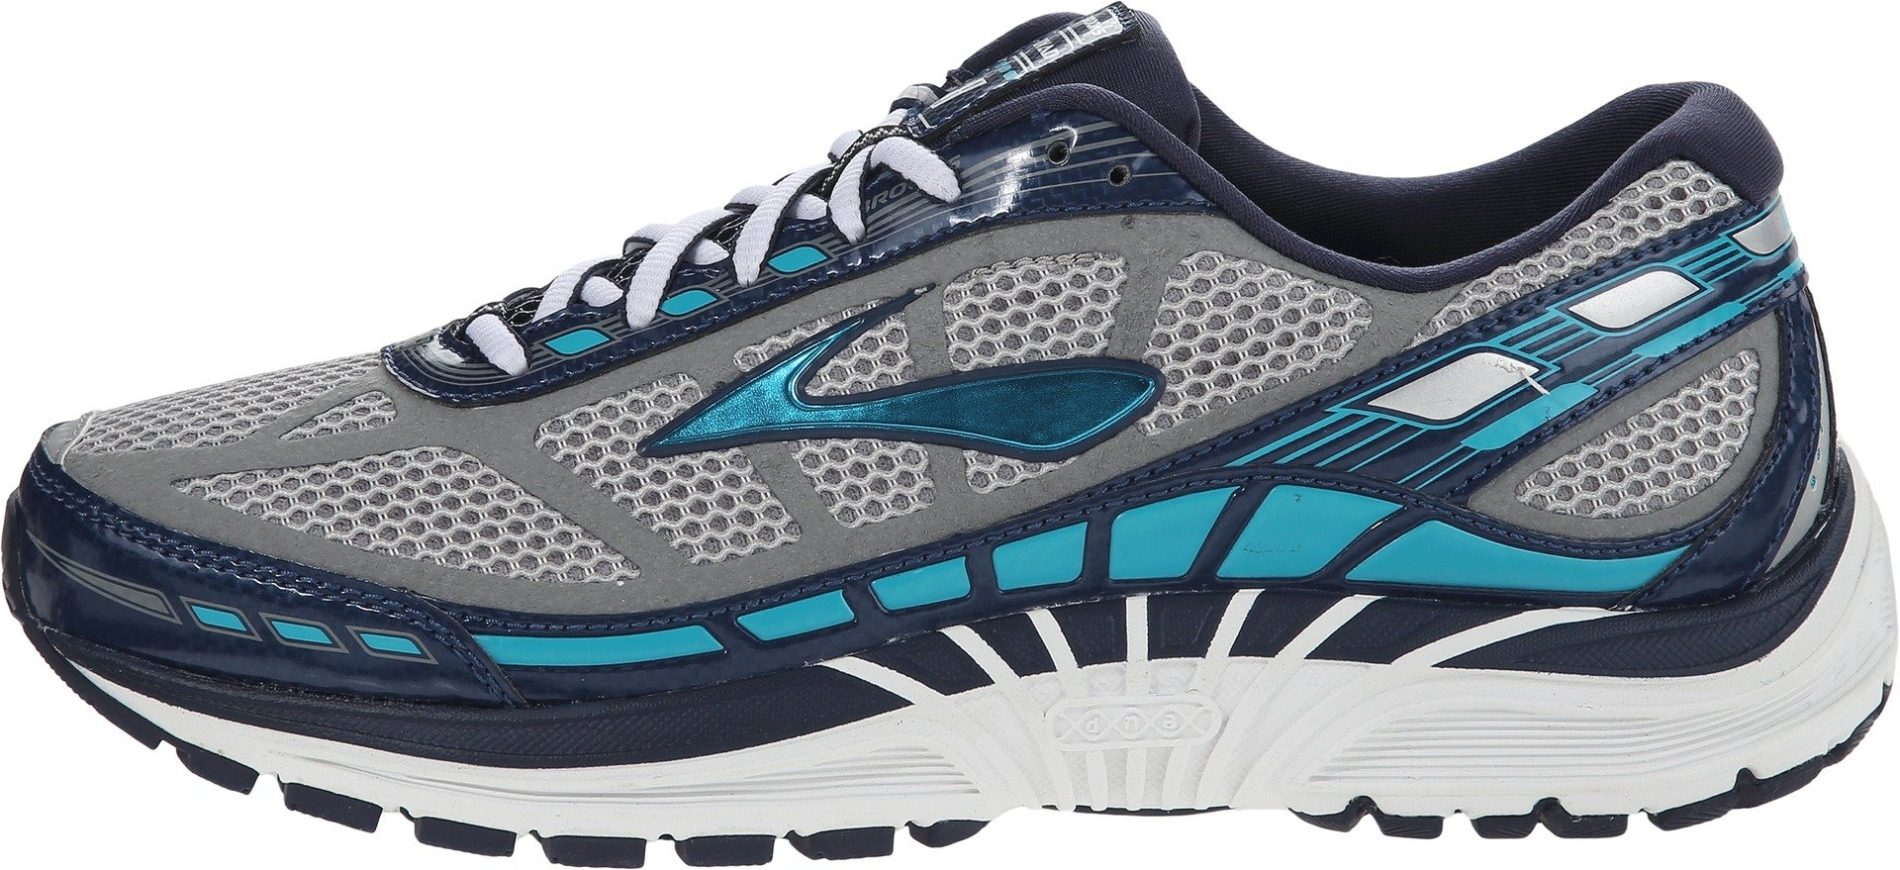 8 Reasons to/NOT to Buy Brooks Dyad 8 